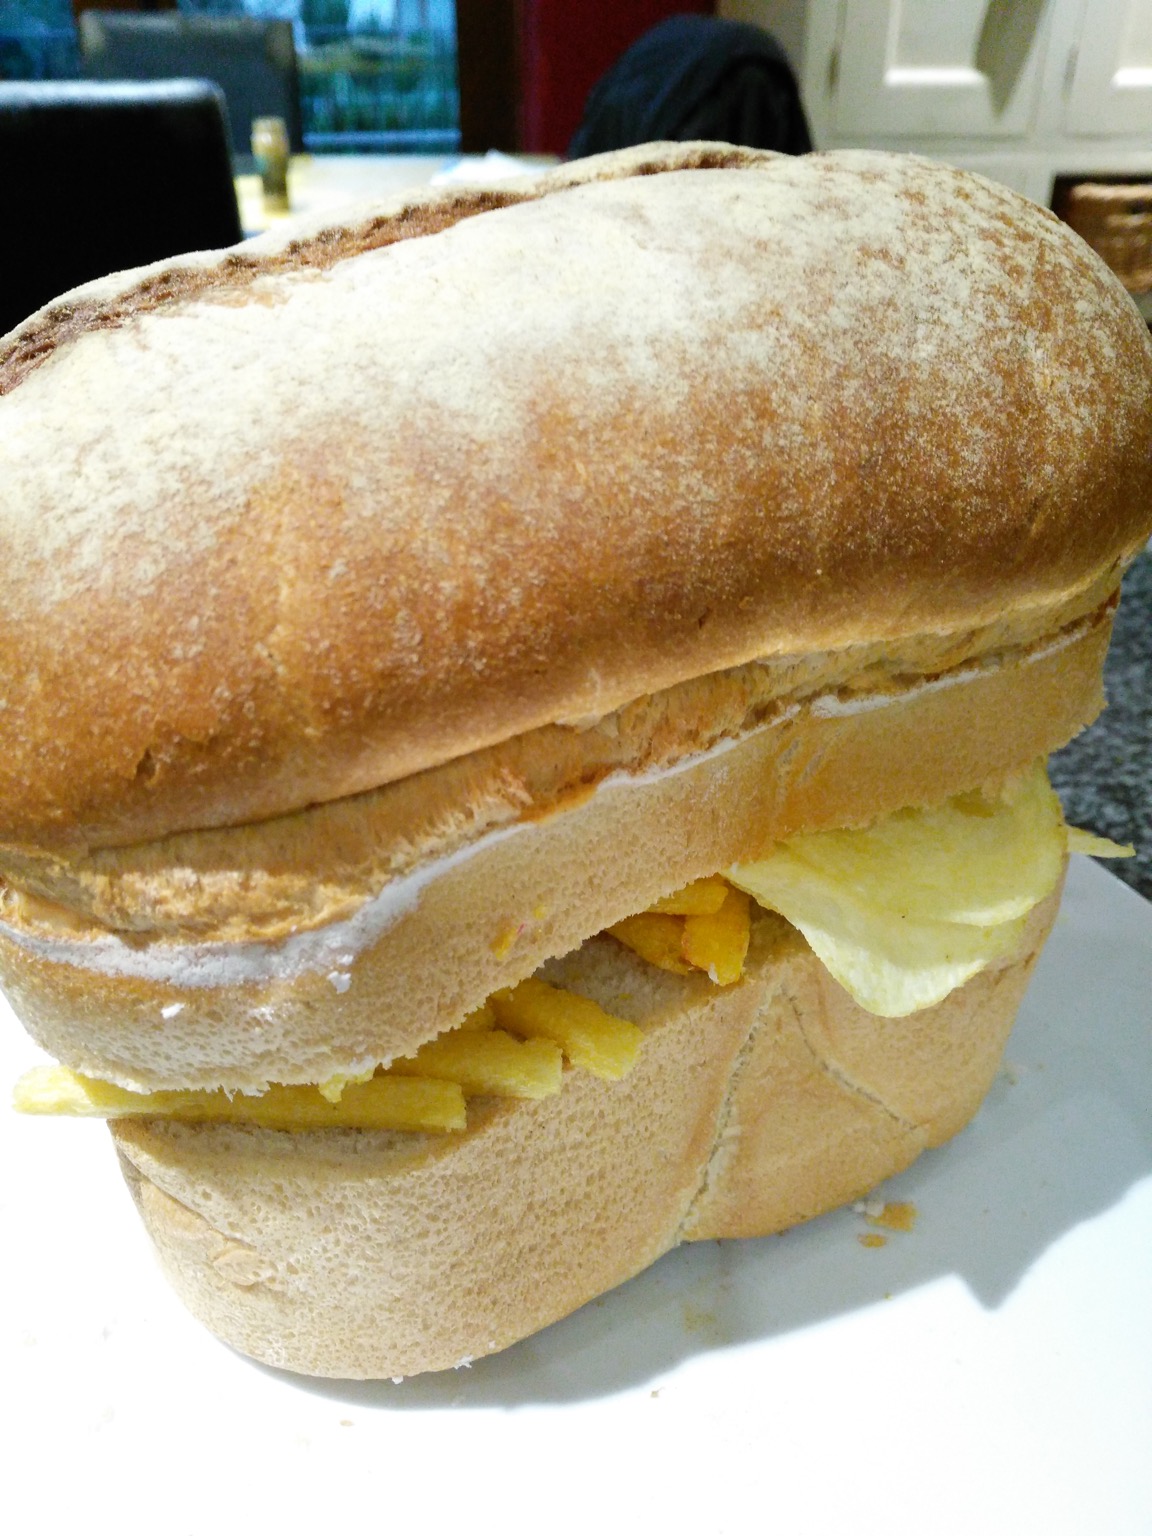 Crisps, Frazzles and Chipsticks within an entire loaf